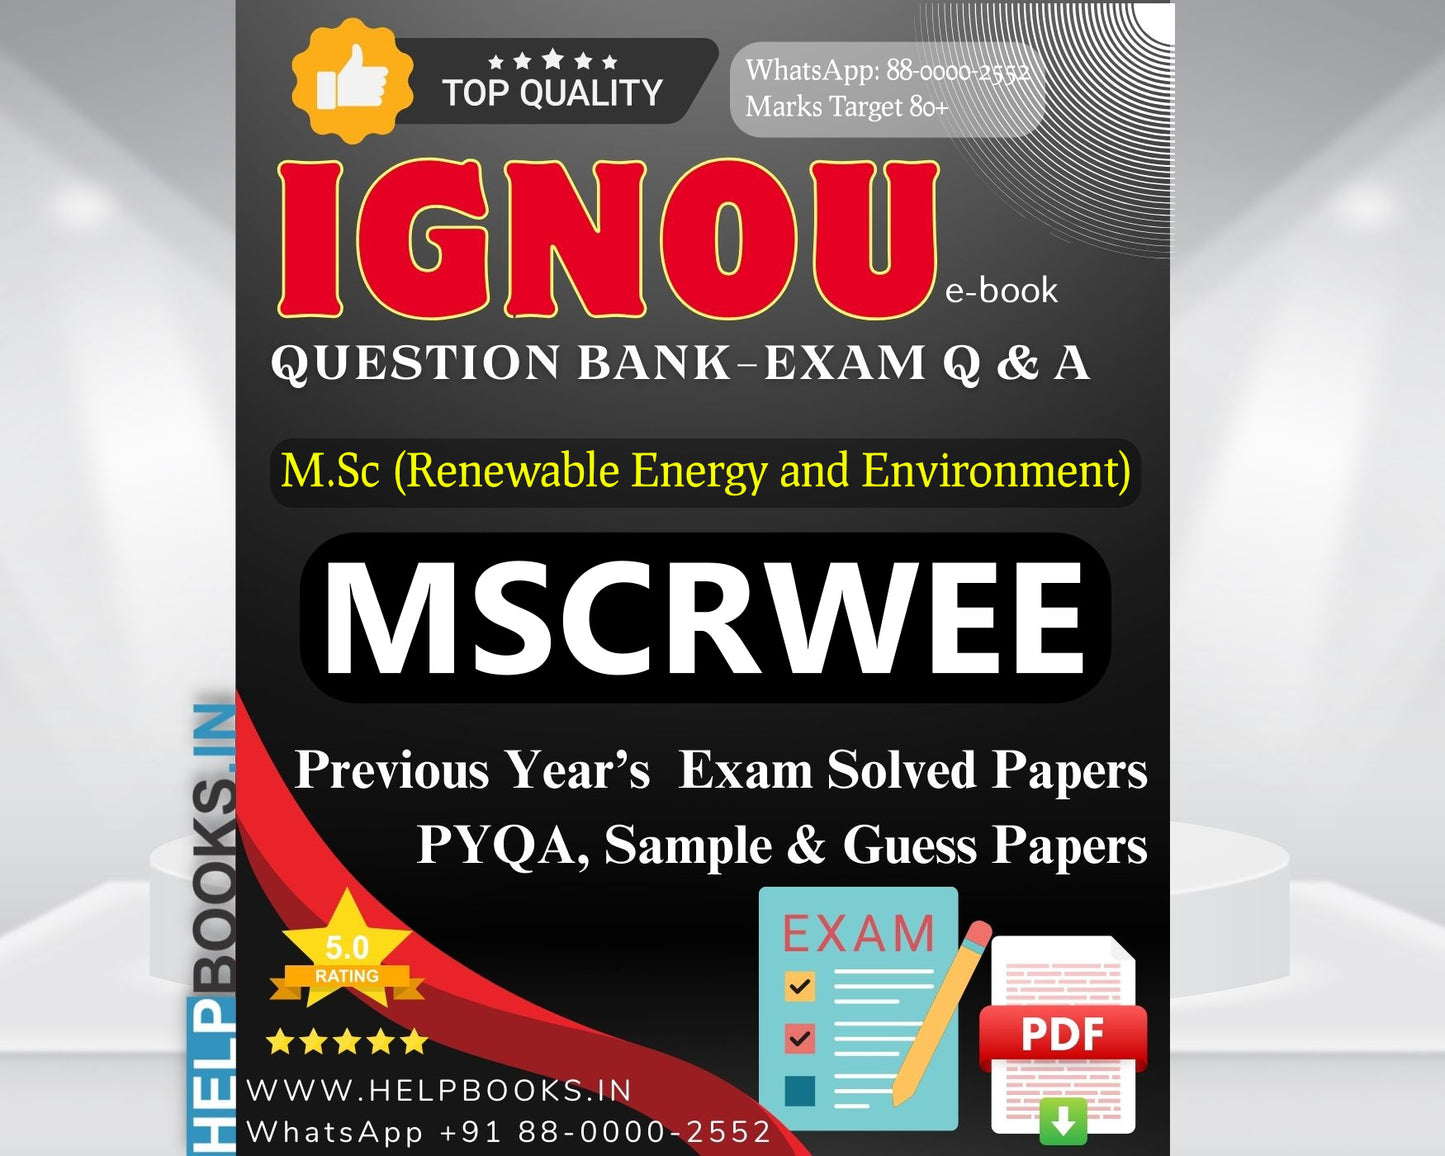 MSCRWEE IGNOU Exam Combo of 10 Solved Papers: 5 Previous Years' Solved Papers & 5 Sample Guess Papers for Master of Science Renewable Energy and Environment